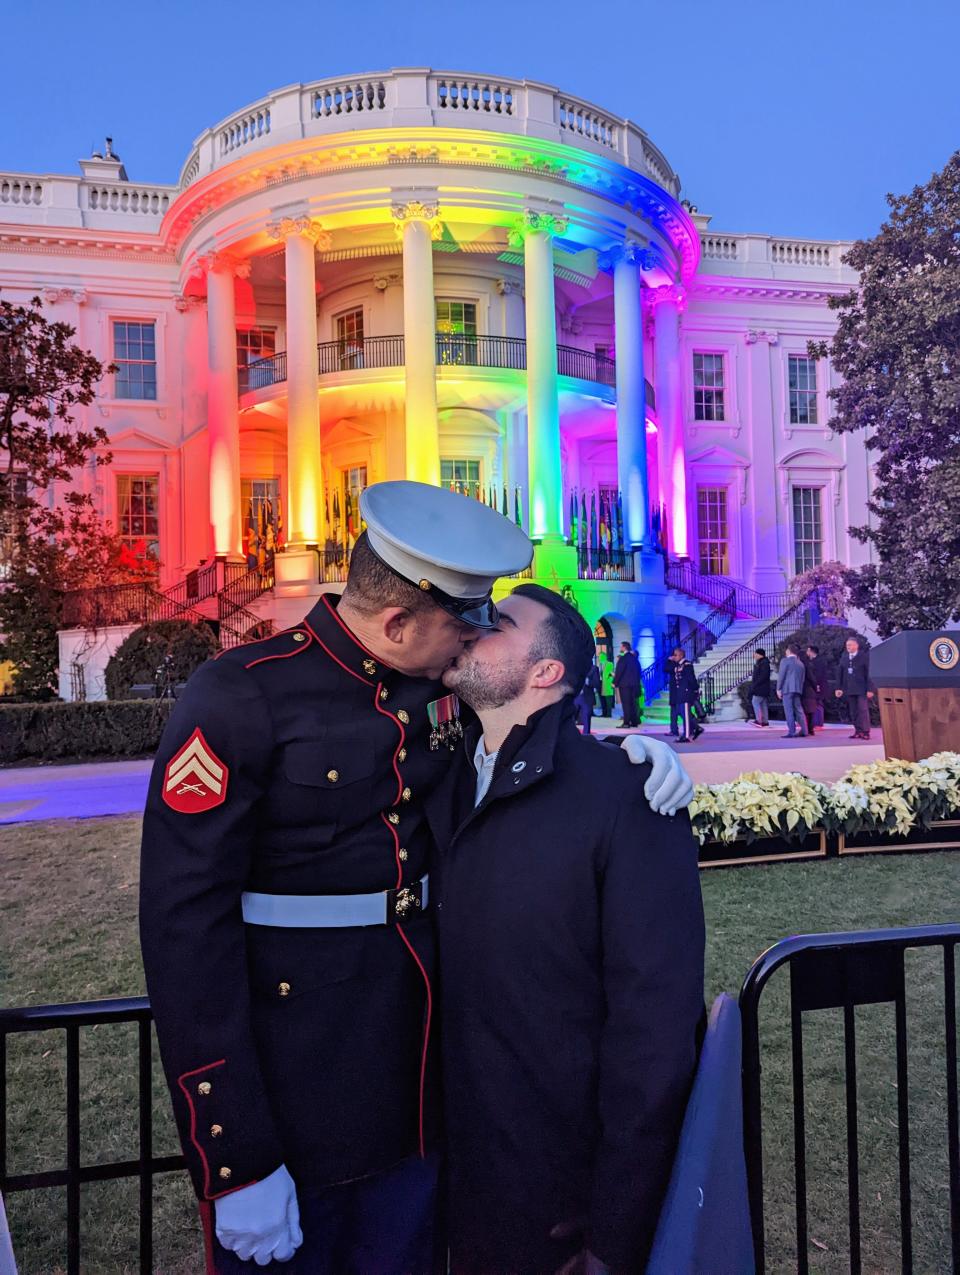 Christian Fuscarino, right, and his husband, Aaron Williams, kiss outside the White House in Washington, D.C. on Tuesday, Dec. 13, 2022 before President Joe Biden signed the Respect for Marriage Act.